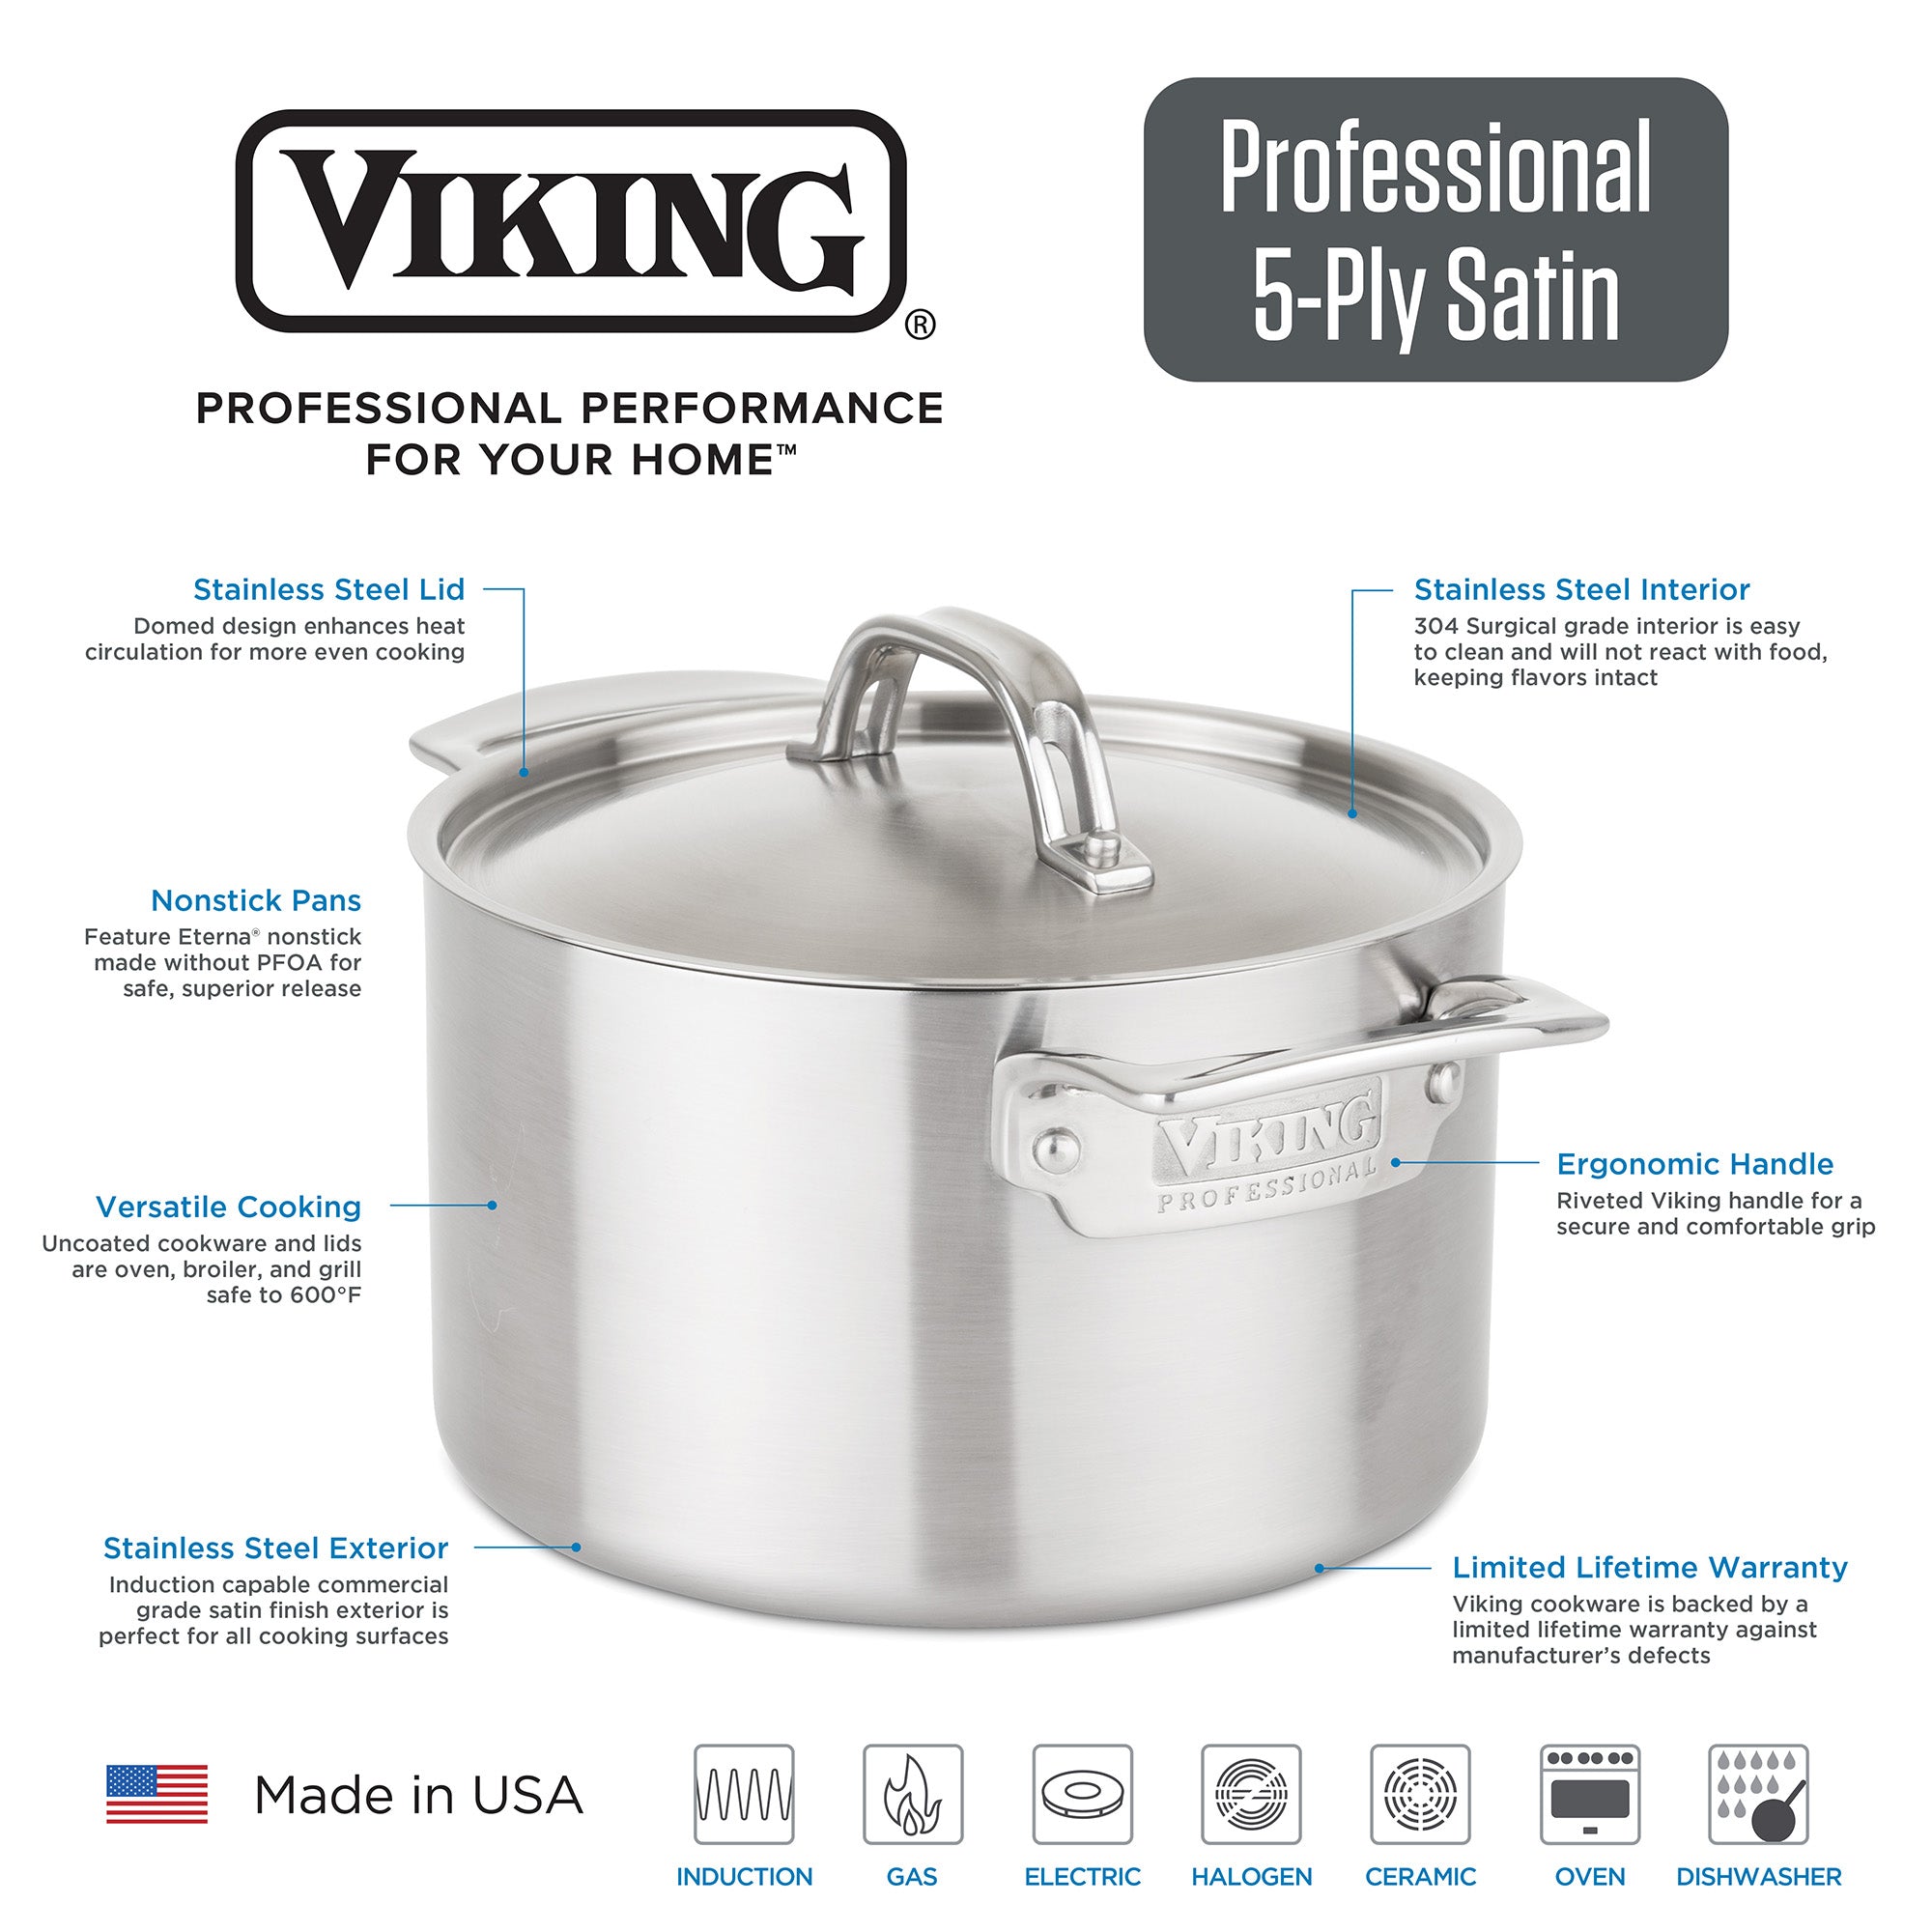 Viking Professional 5-Ply Stainless Steel 6.4-Quart Casserole Pan